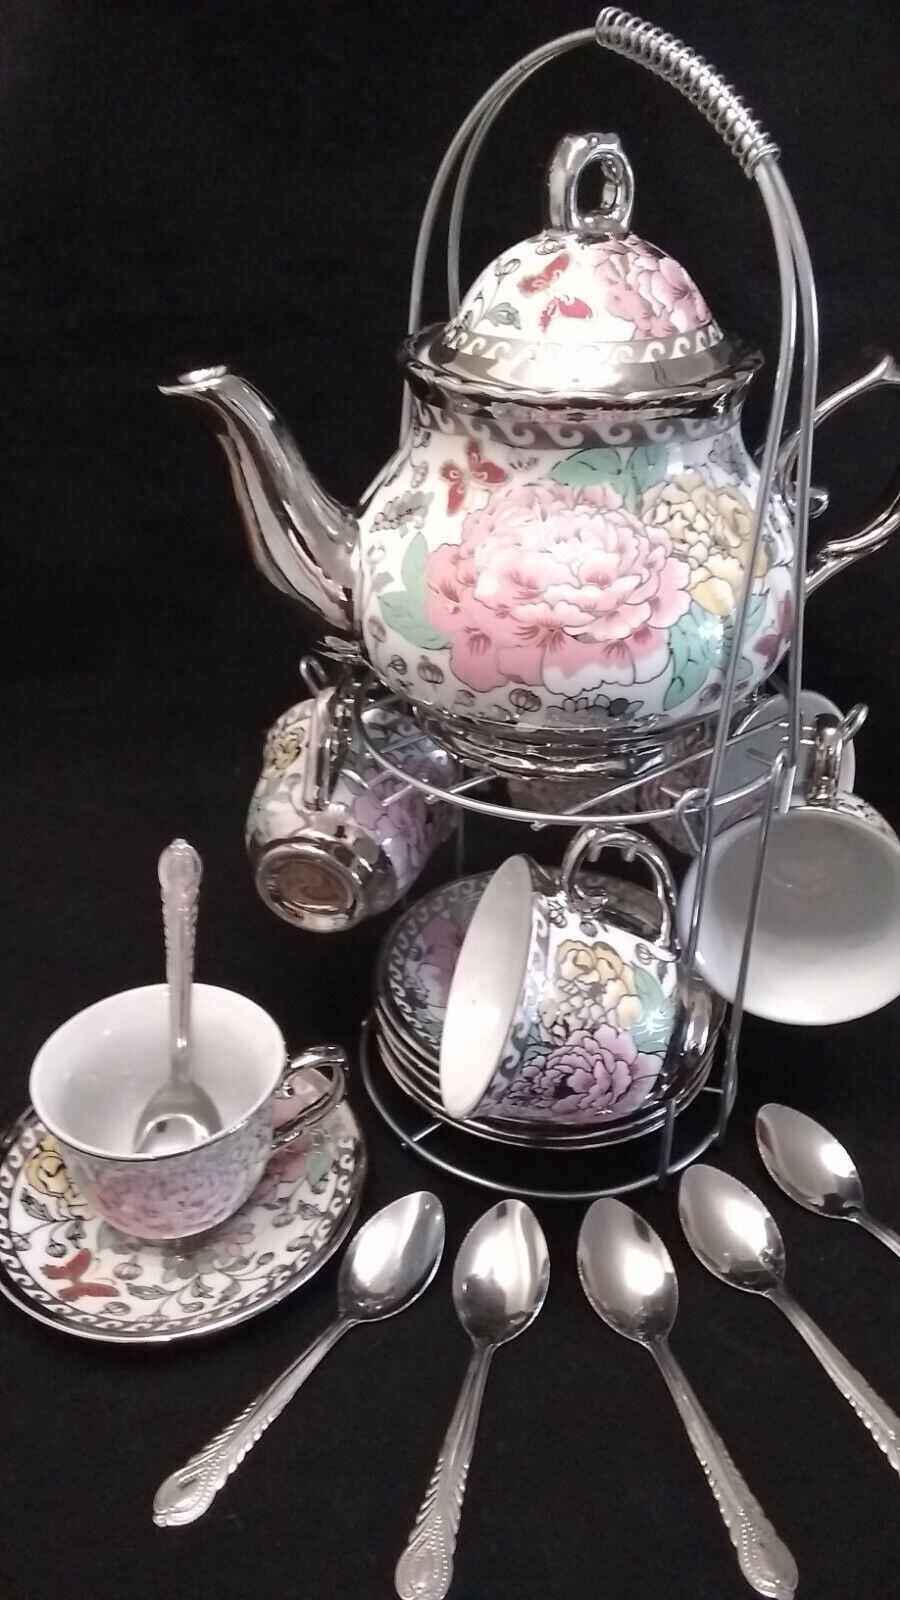 20 Piece Tea Set Pot 6 Cup Saucer Rack Silver Multi Cup Floral Holiday Party 